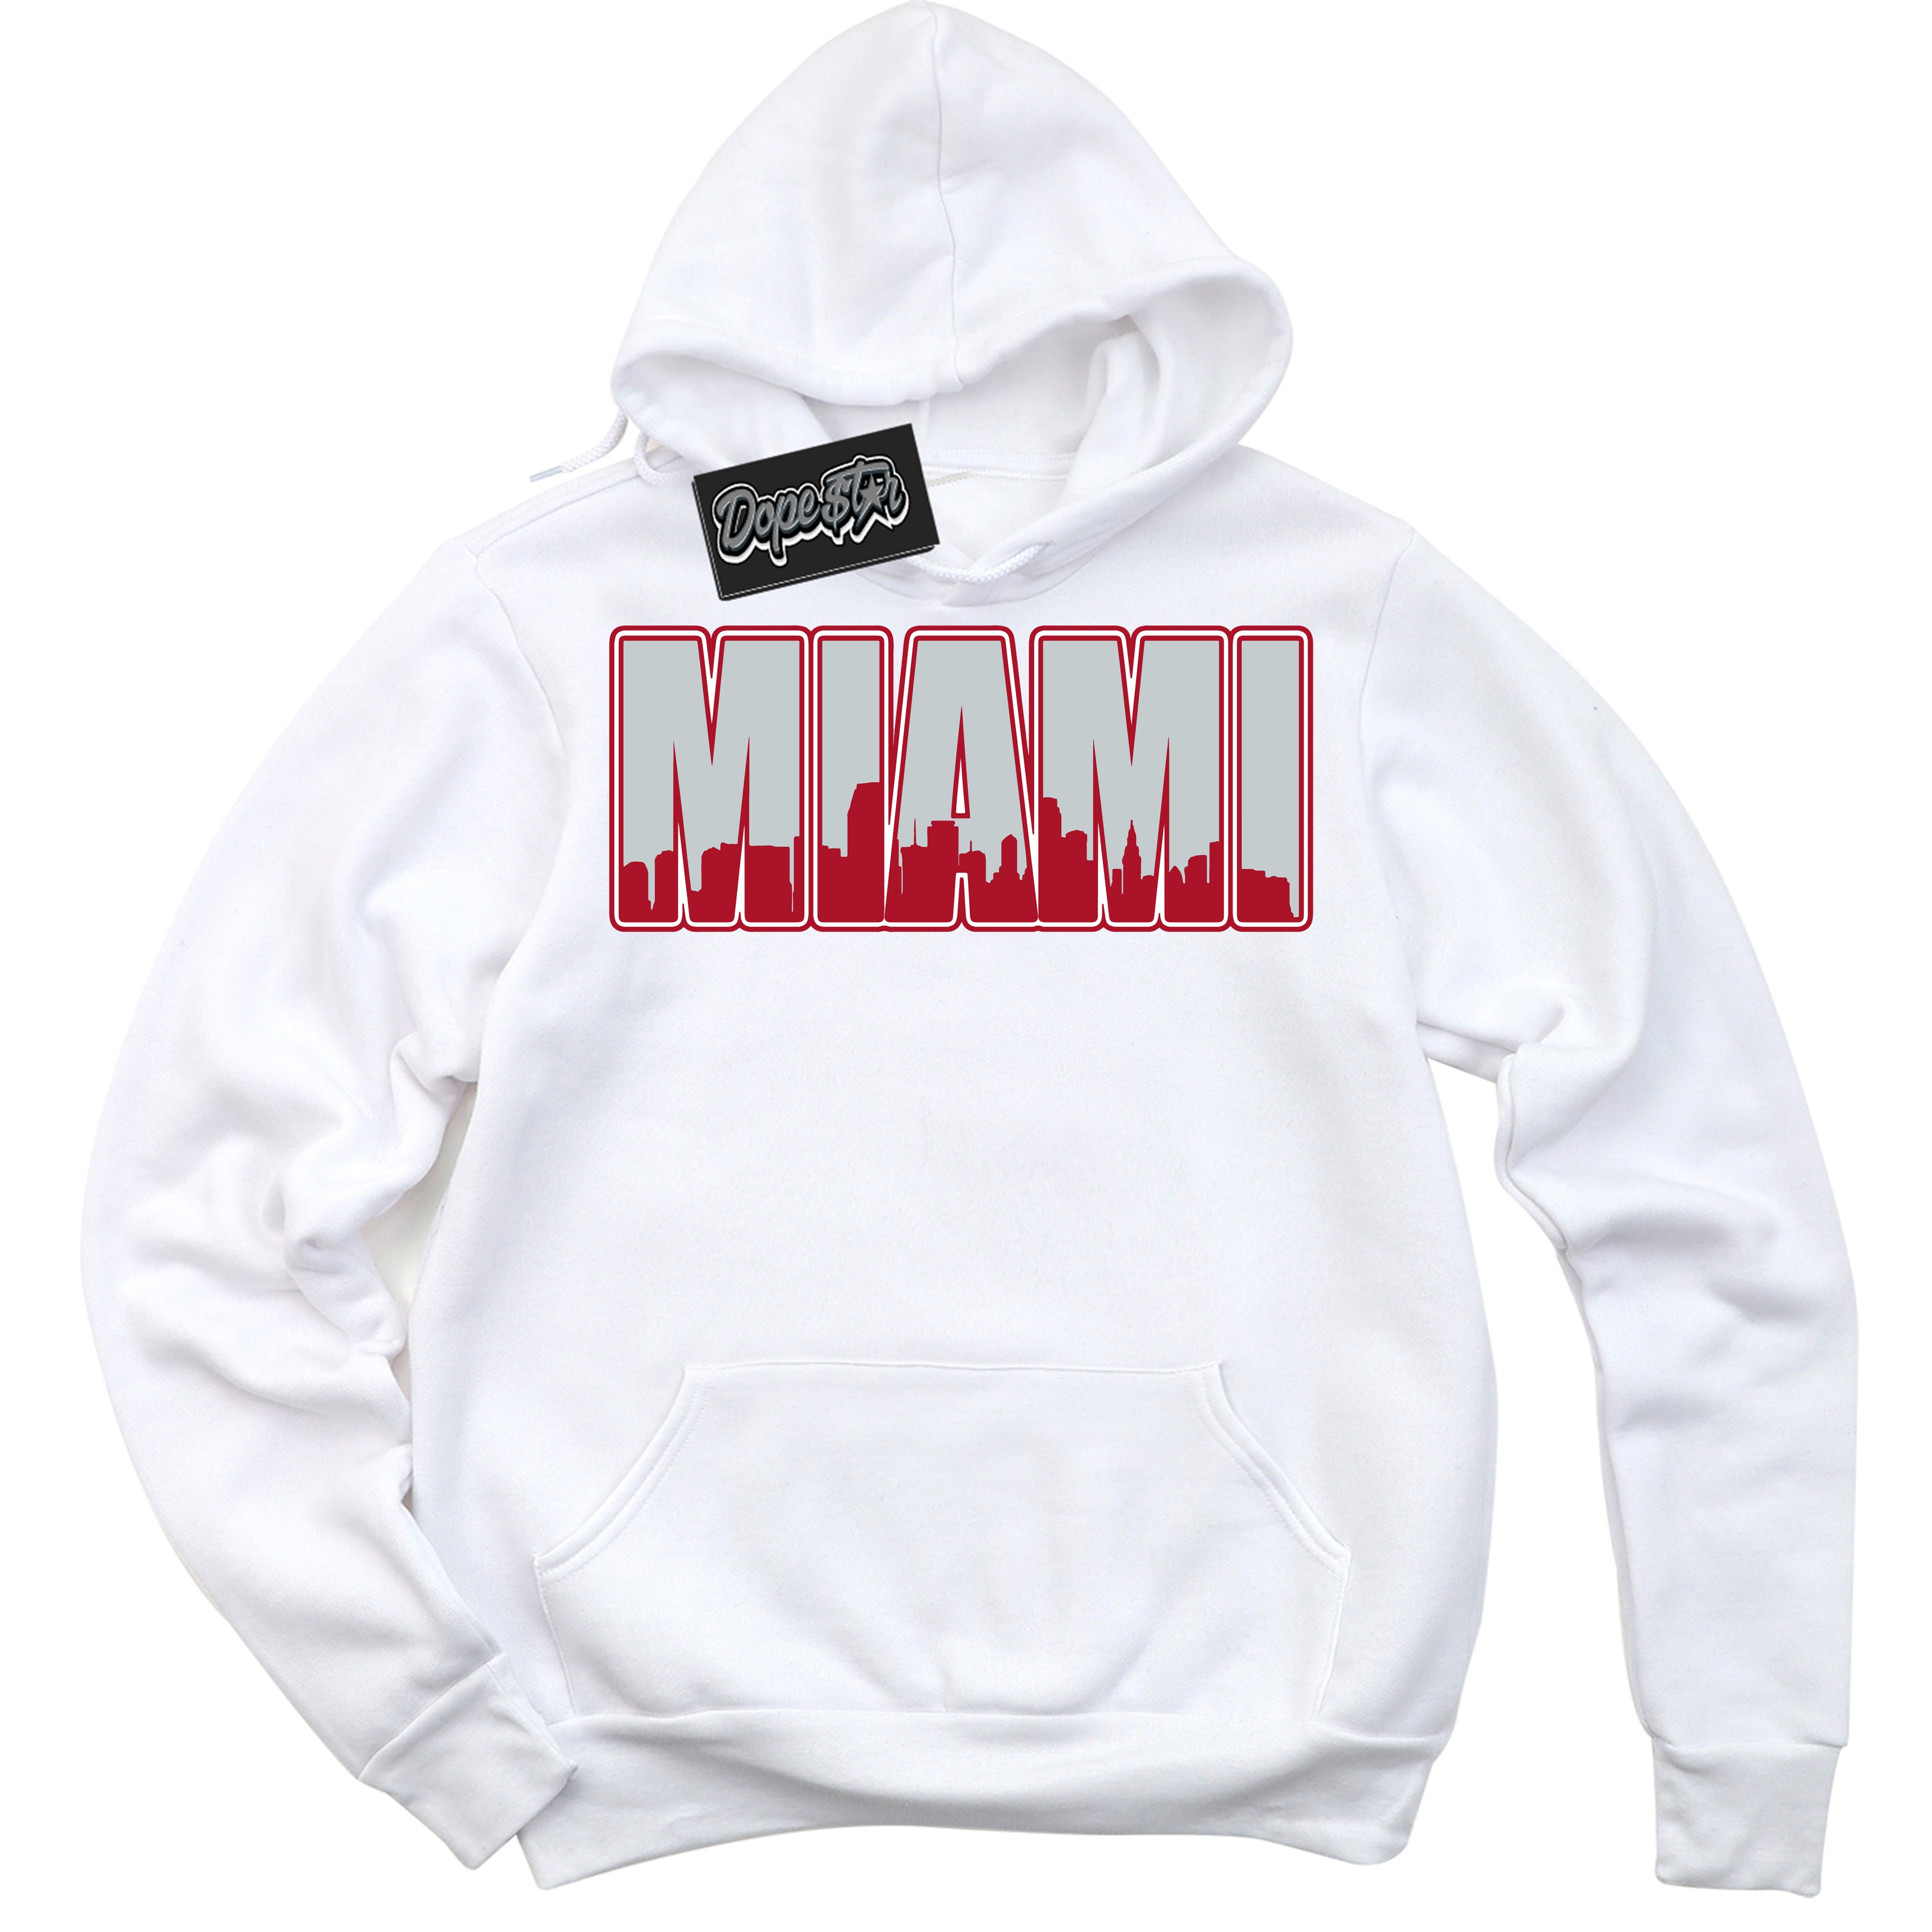 Cool Black Hoodie with “ Miami ”  design that Perfectly Matches  Reverse Ultraman Sneakers.